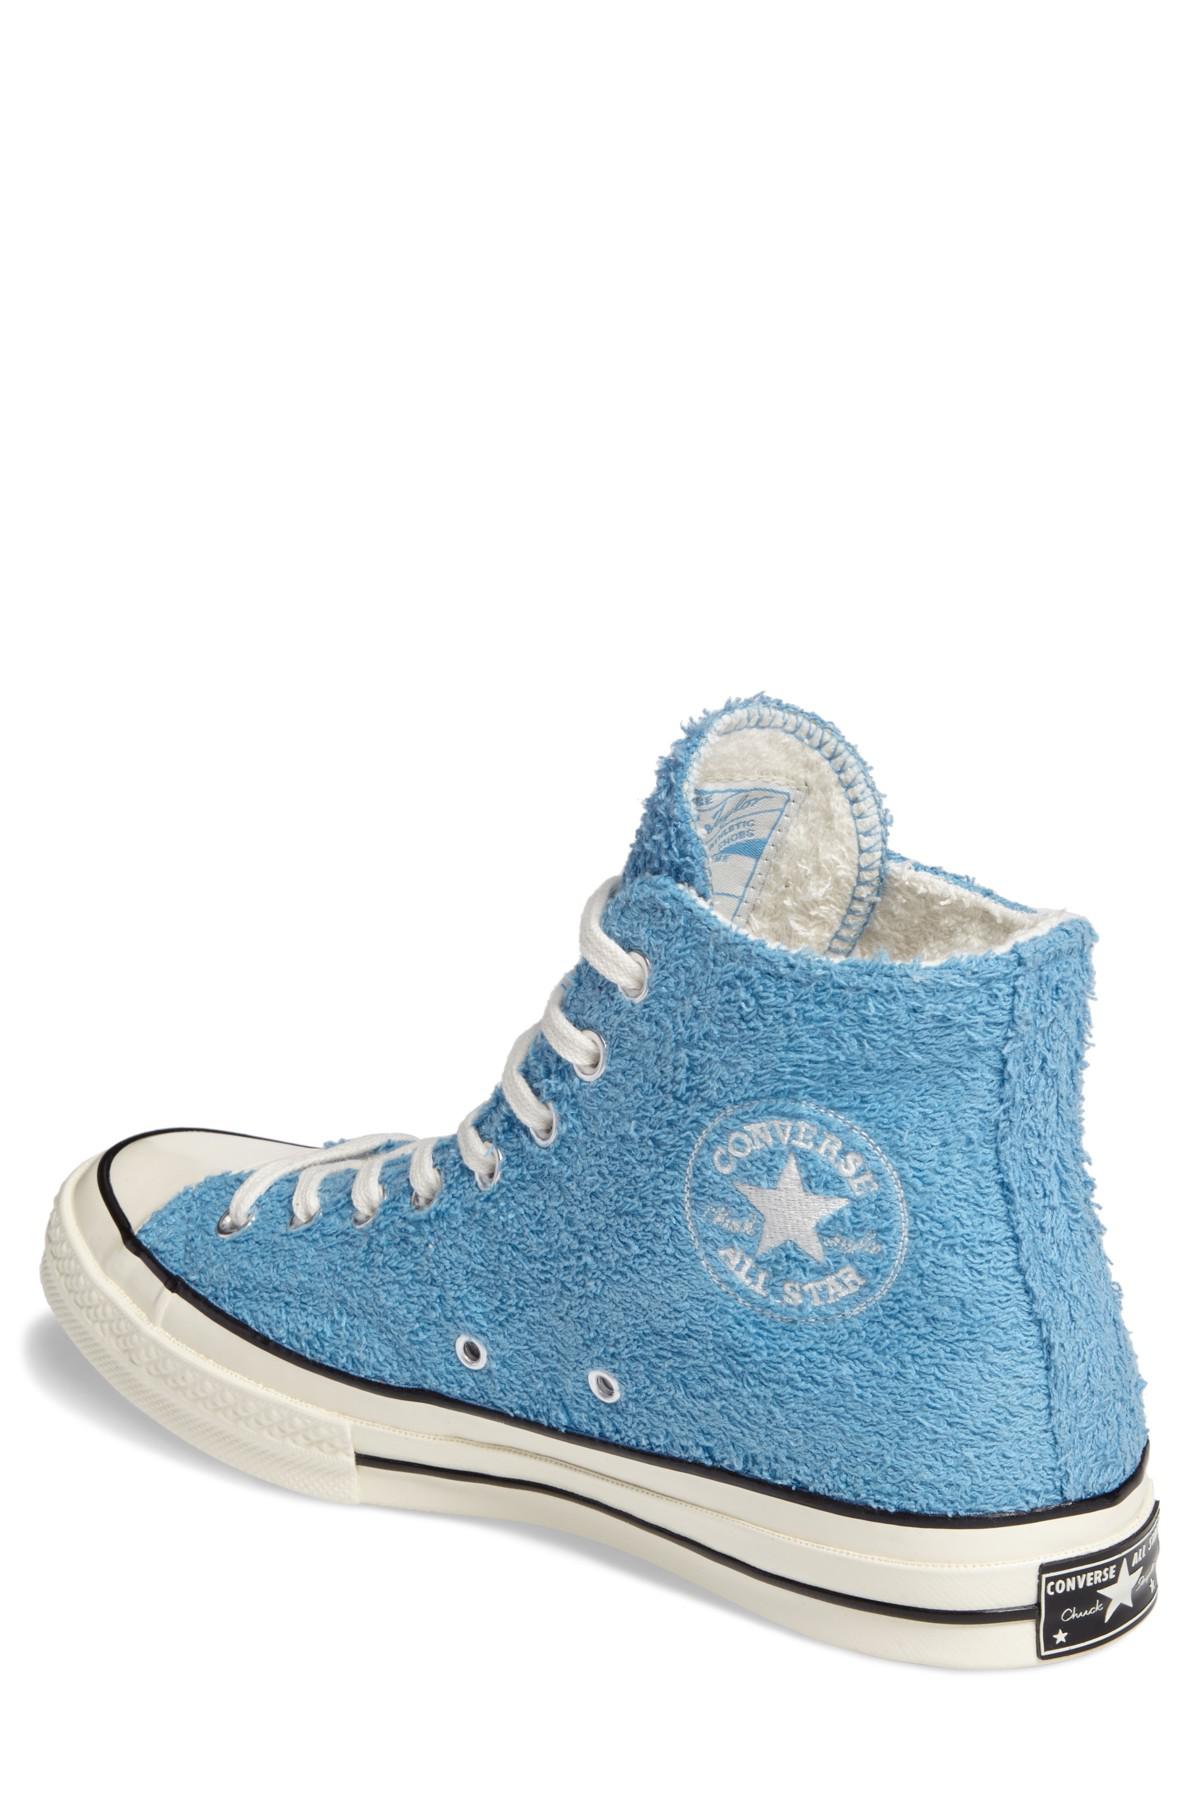 Converse Chuck Taylor All Star Terry Cloth Hi Sneaker in Blue for Men | Lyst